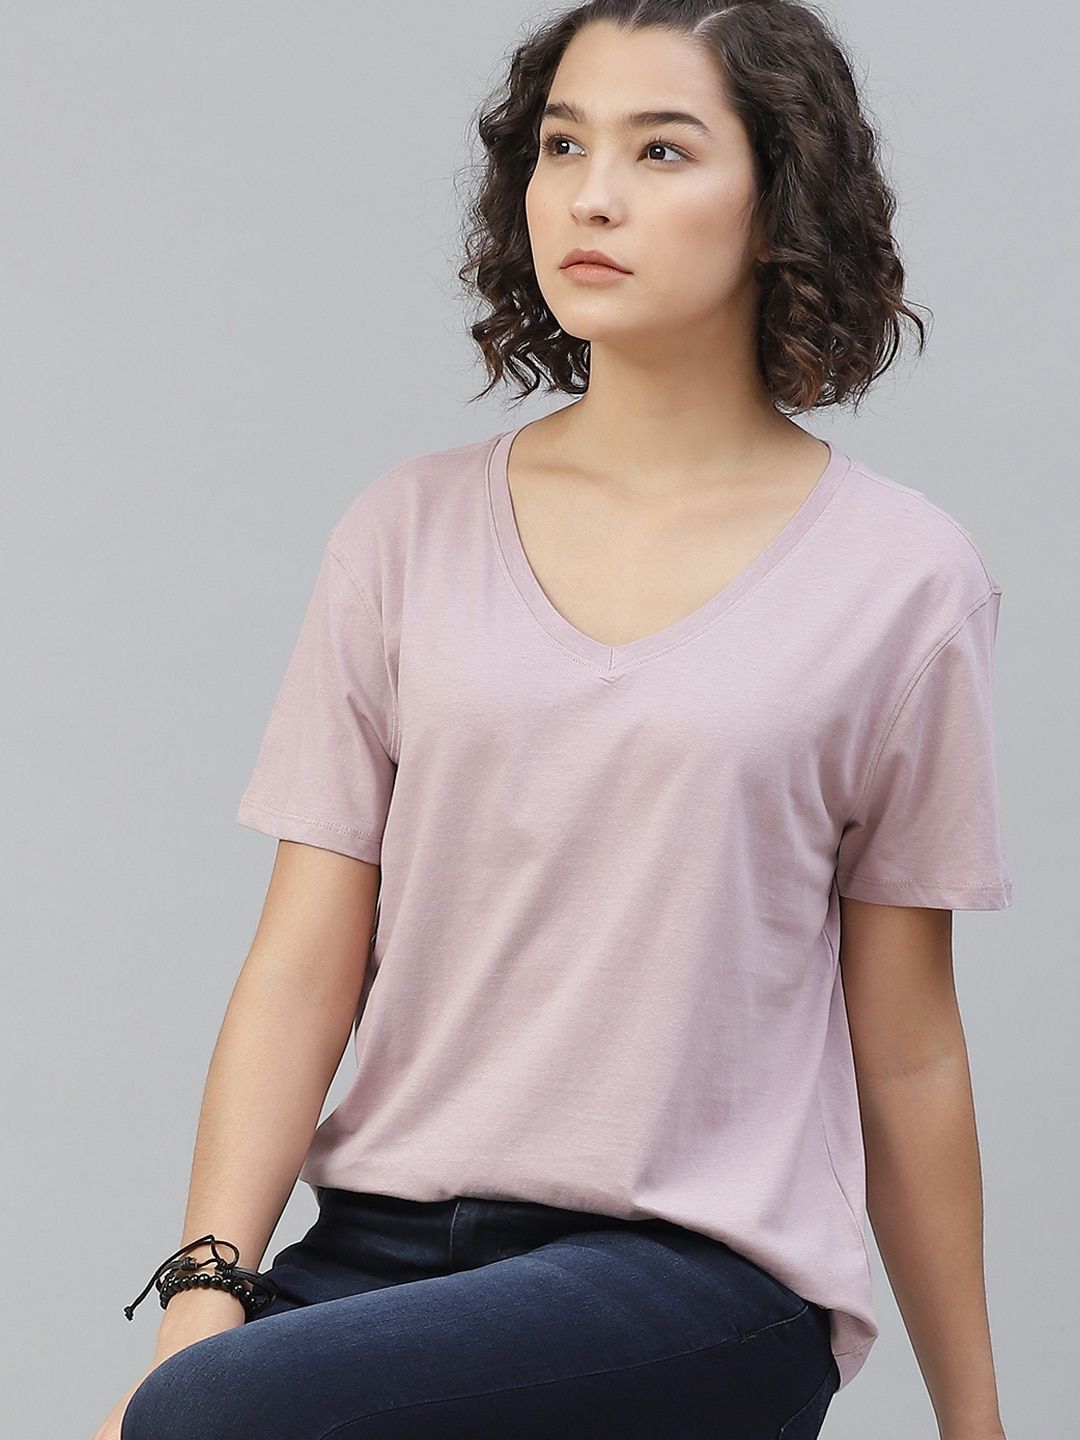 The Roadster Lifestyle Co Women Lavender Solid Pure Cotton V-Neck Pure Cotton T-shirt Price in India